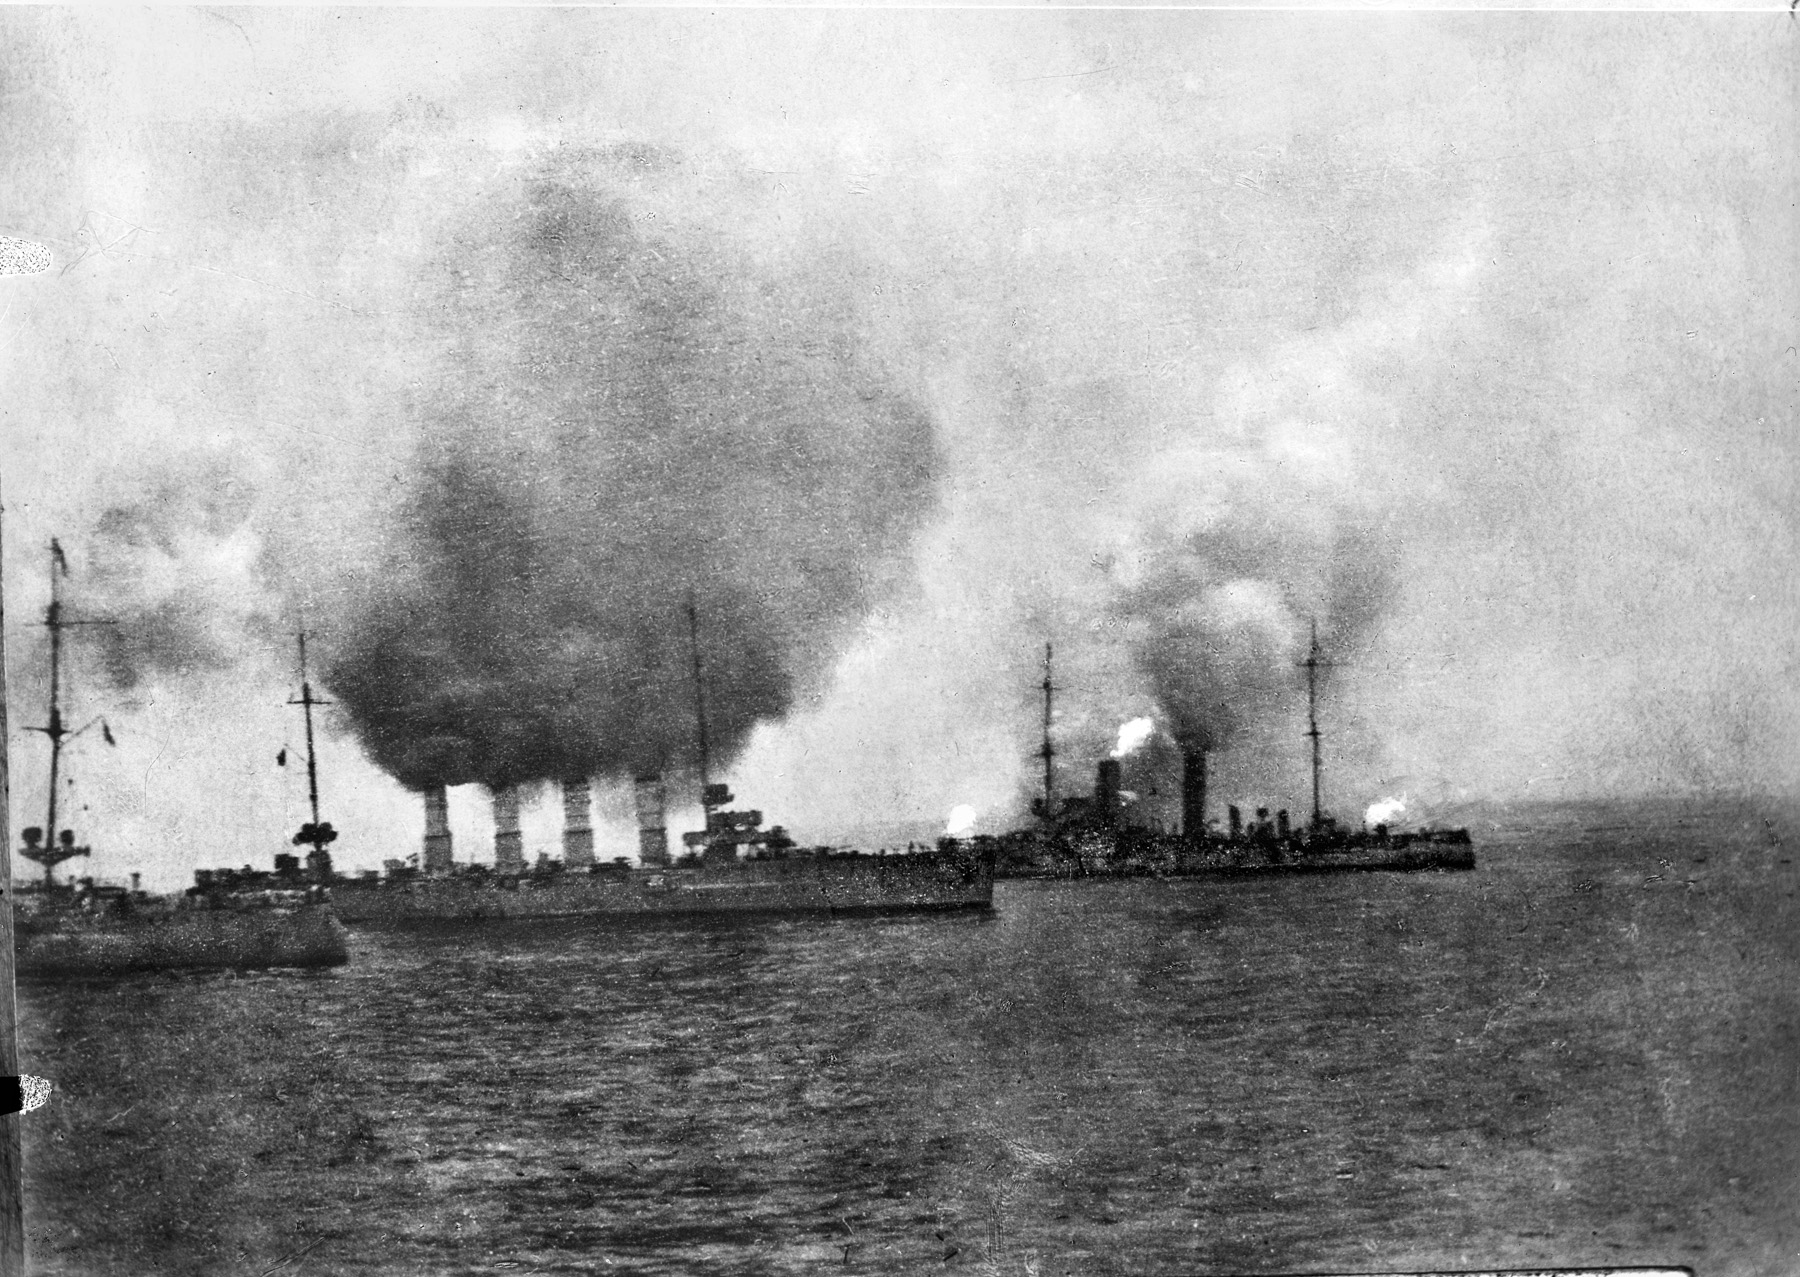 German light cruisers SMS Ariadne, Stralsund, and Danzig photographed during the action at Heligoland.